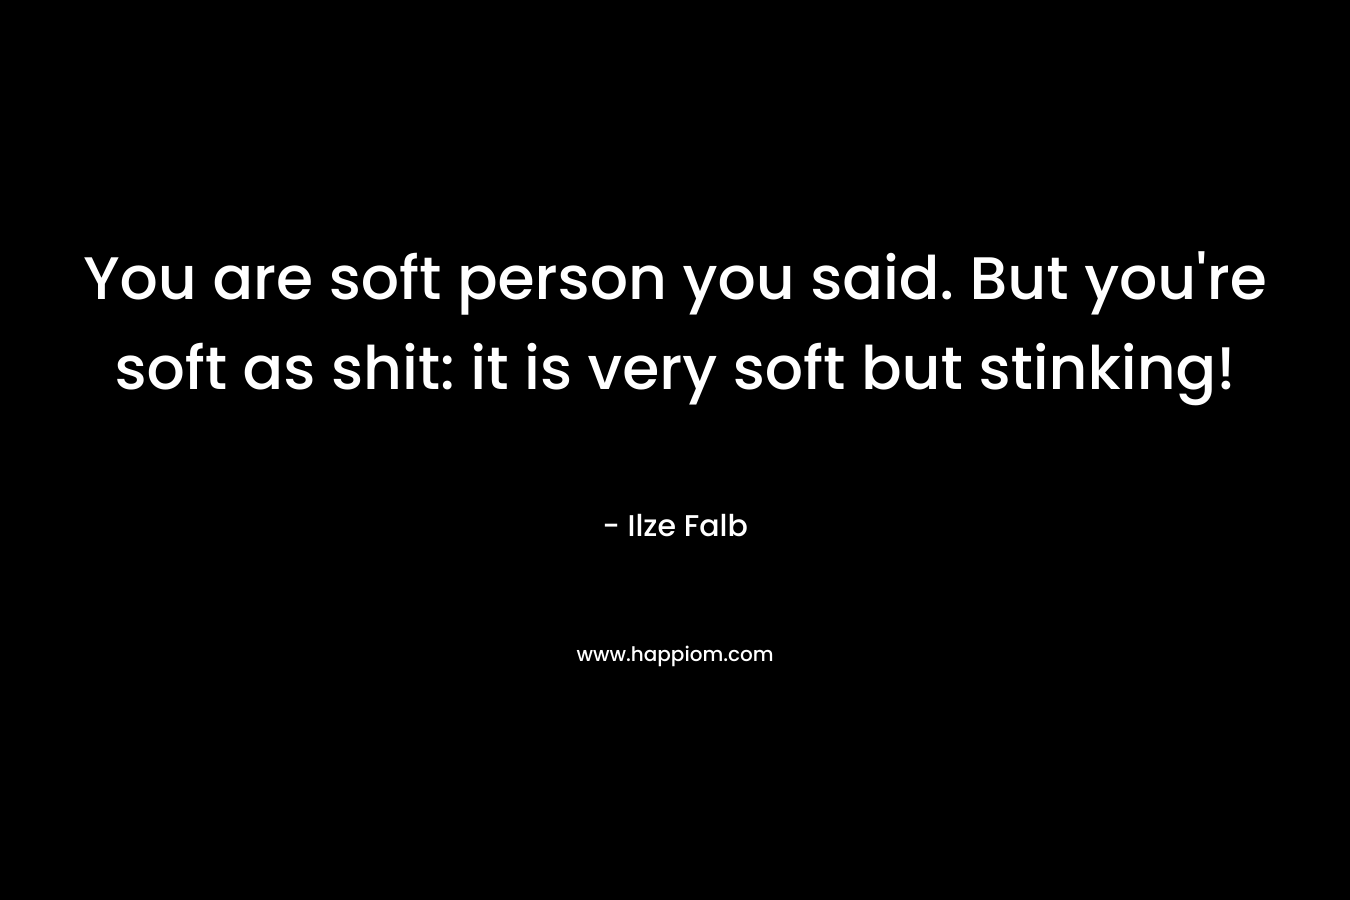 You are soft person you said. But you’re soft as shit: it is very soft but stinking! – Ilze Falb